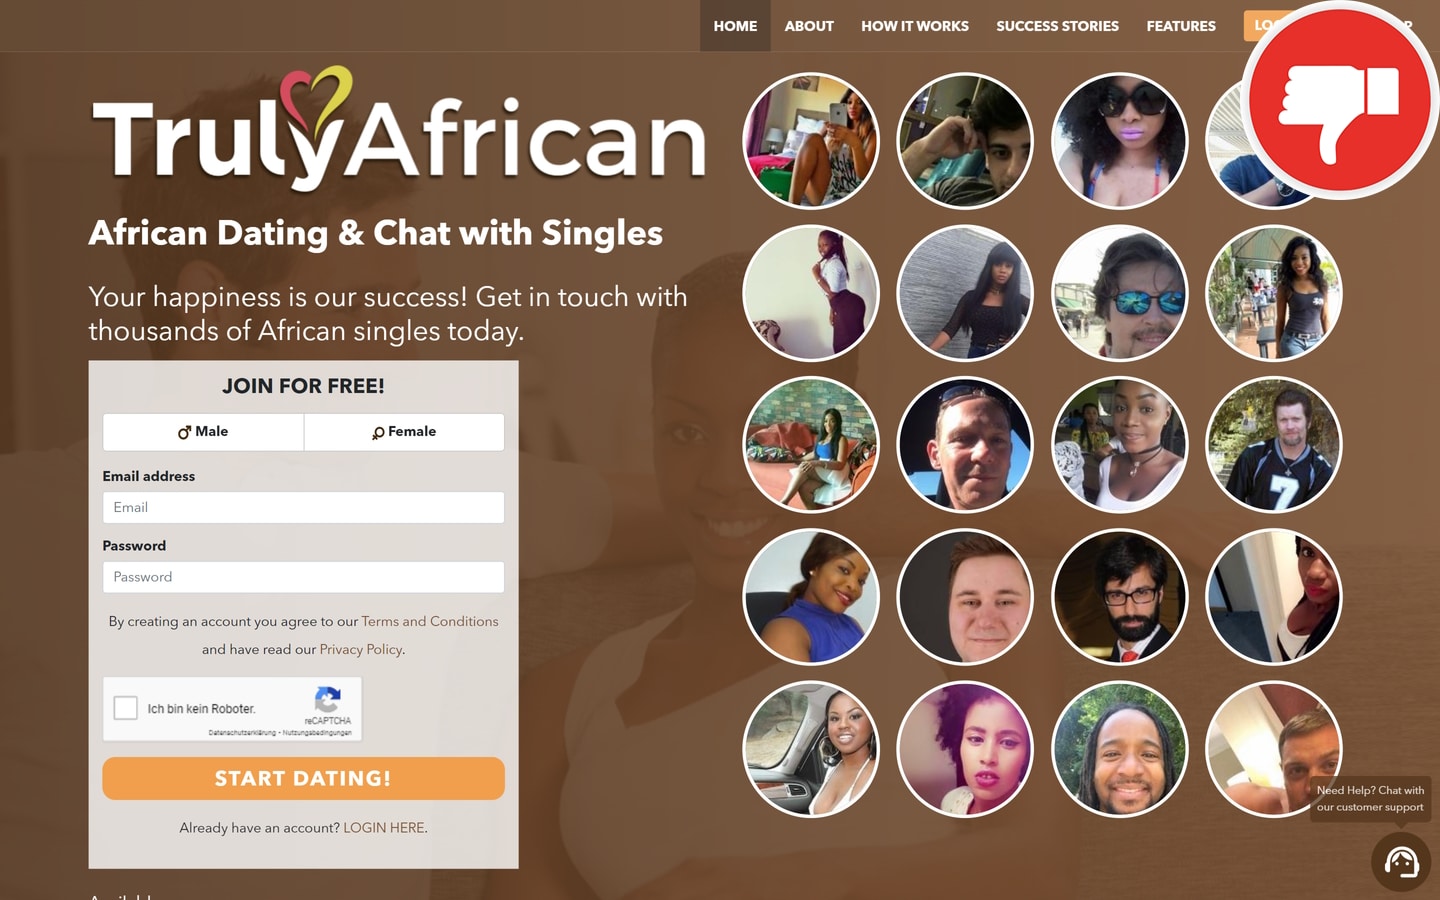 Review TrulyAfrican.com scam experience